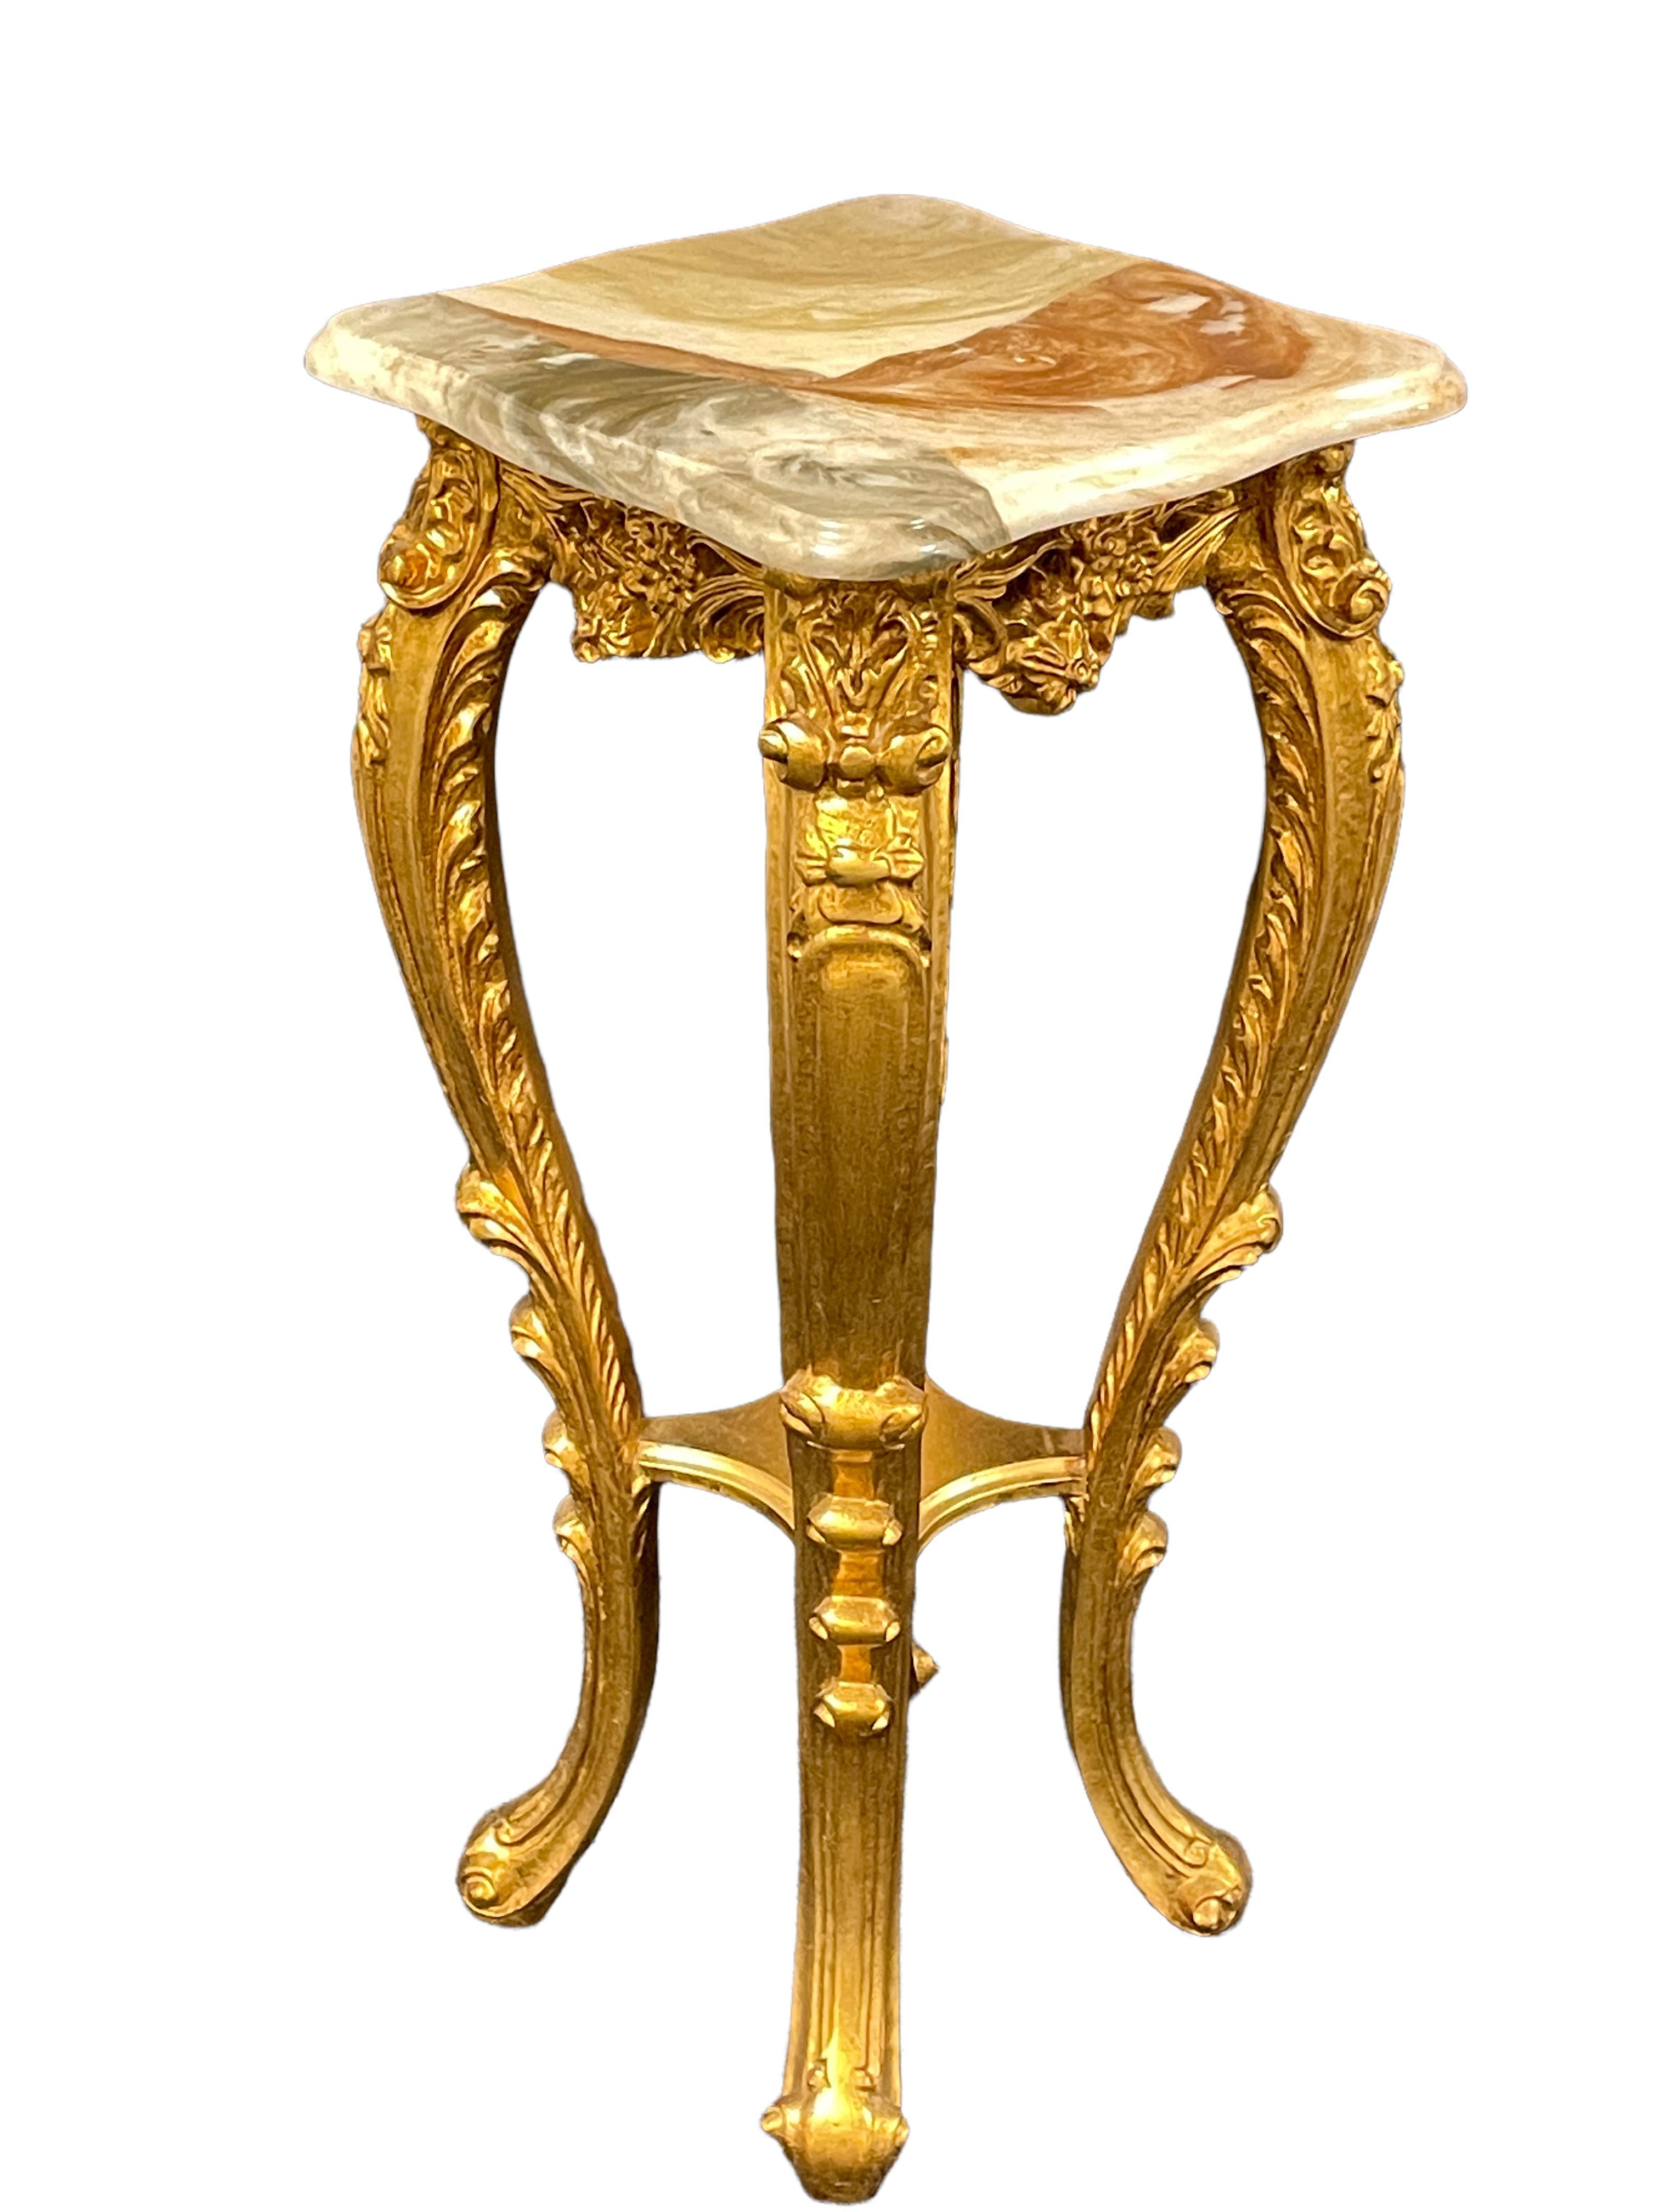 Marble 20th Century Carved Gilt Wood Toleware Console Pedestal Table, Italy For Sale